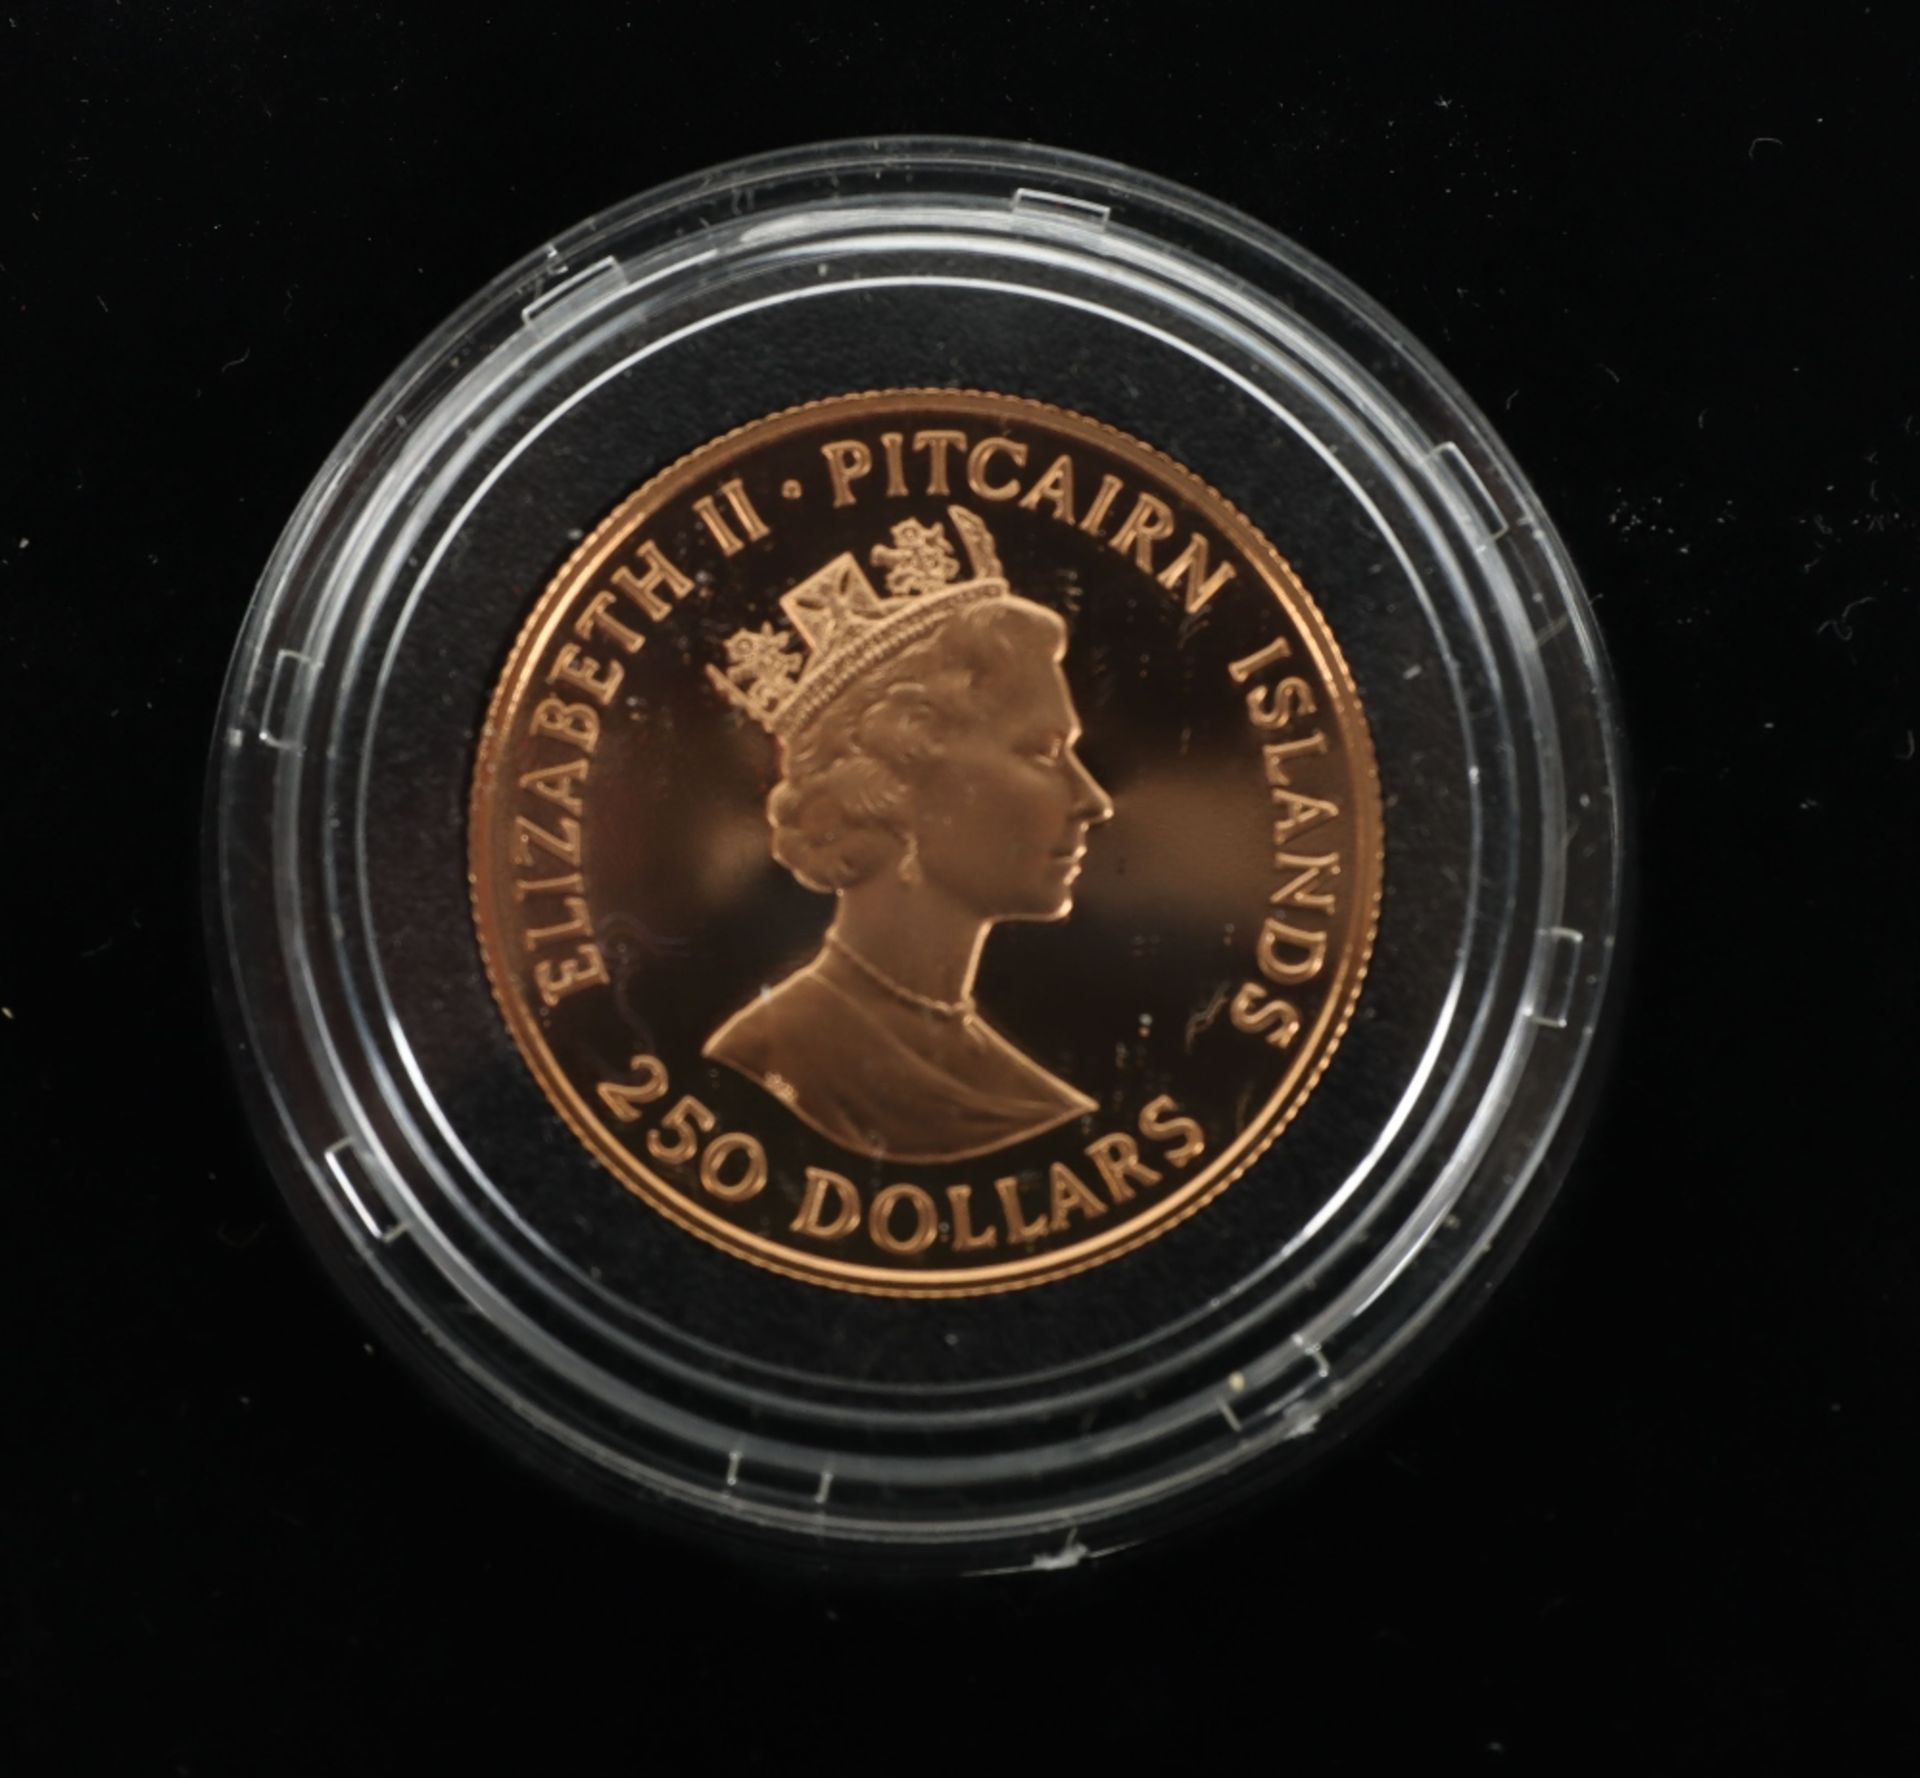 1990 Pitcairn Islands gold proof $250 - Image 4 of 4